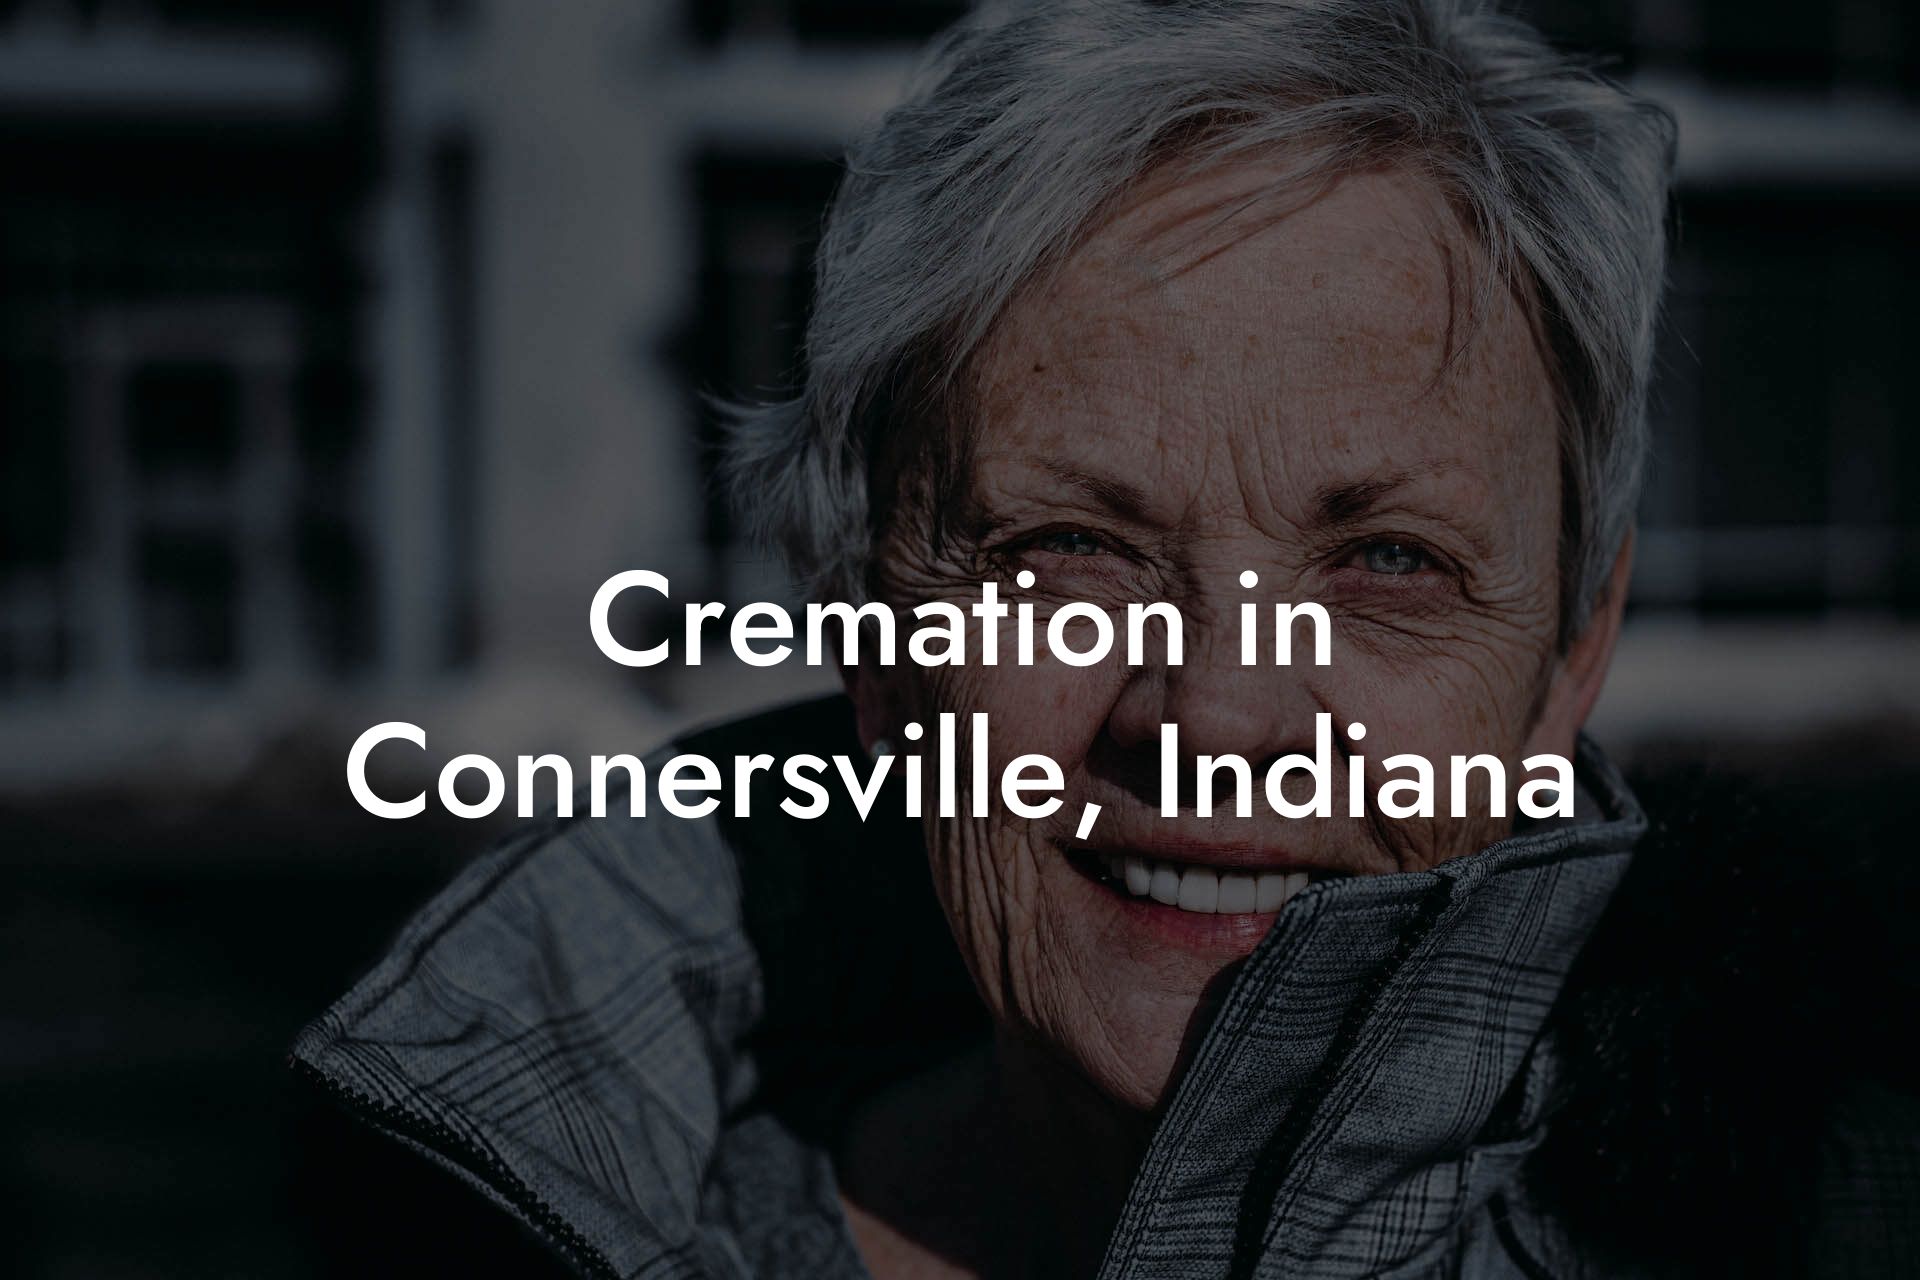 Cremation in Connersville, Indiana